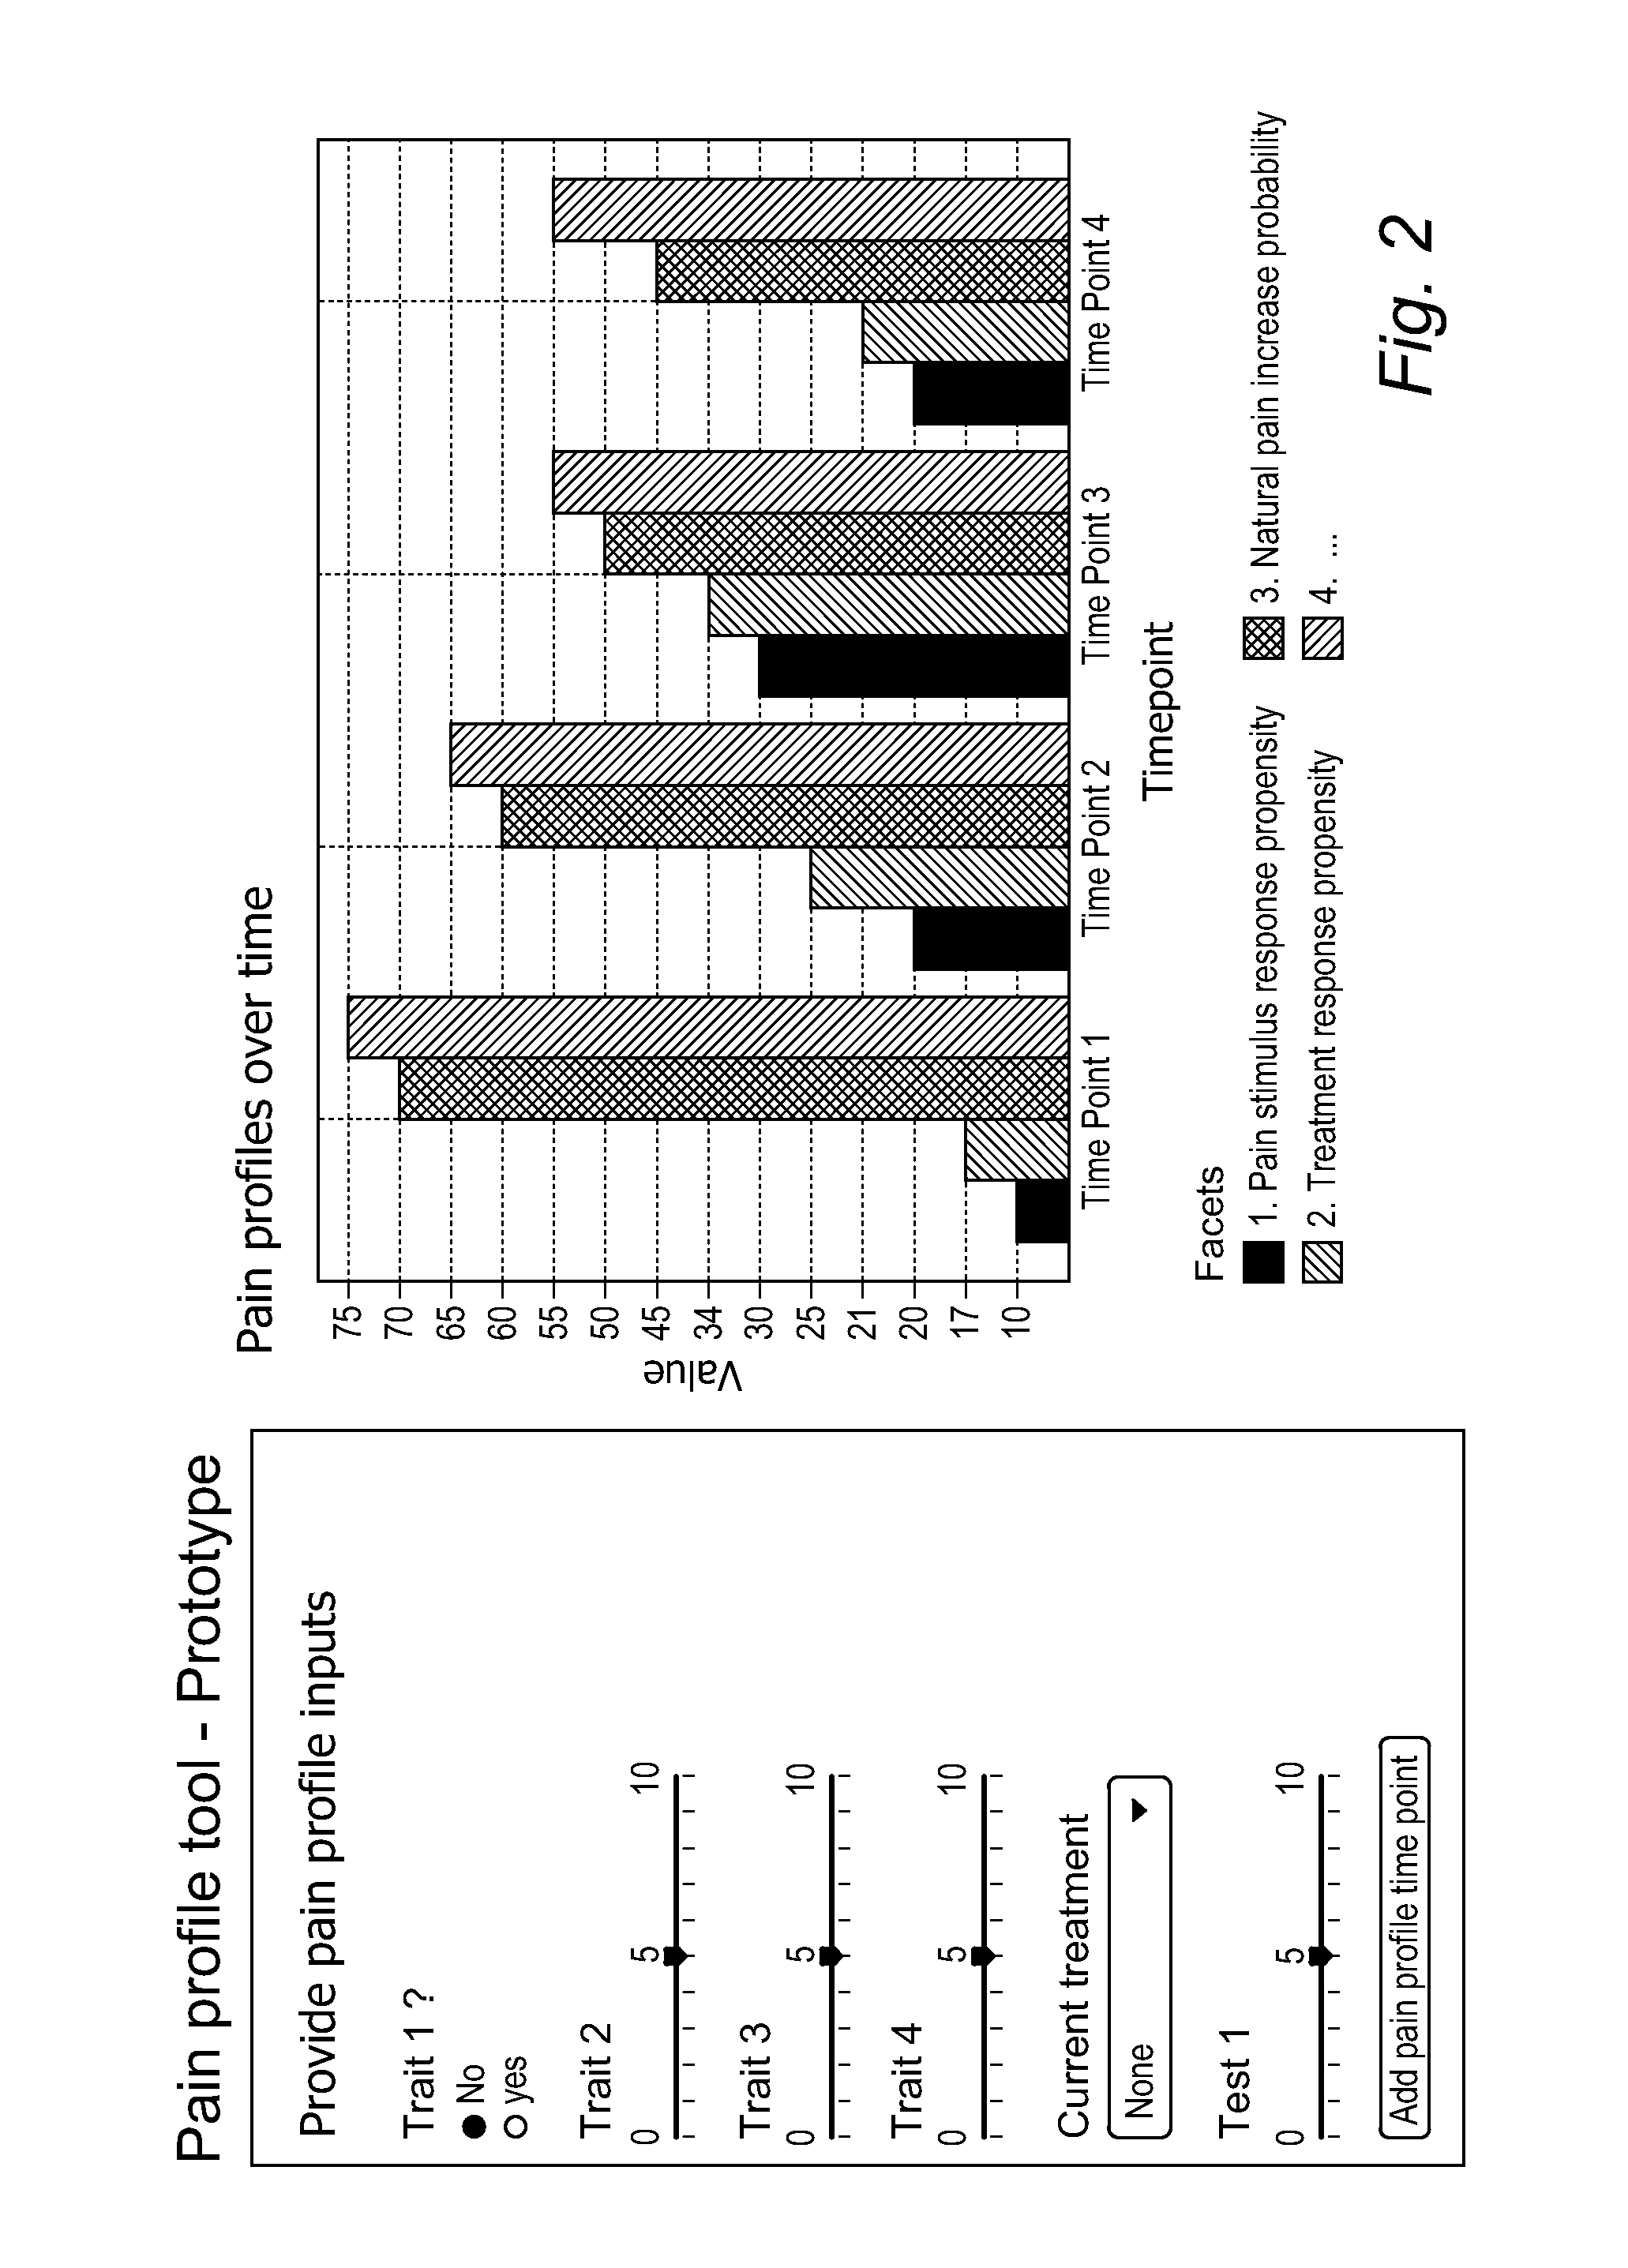 Method and tools for predicting a pain response in a subject suffering from cancer-induced bone pain